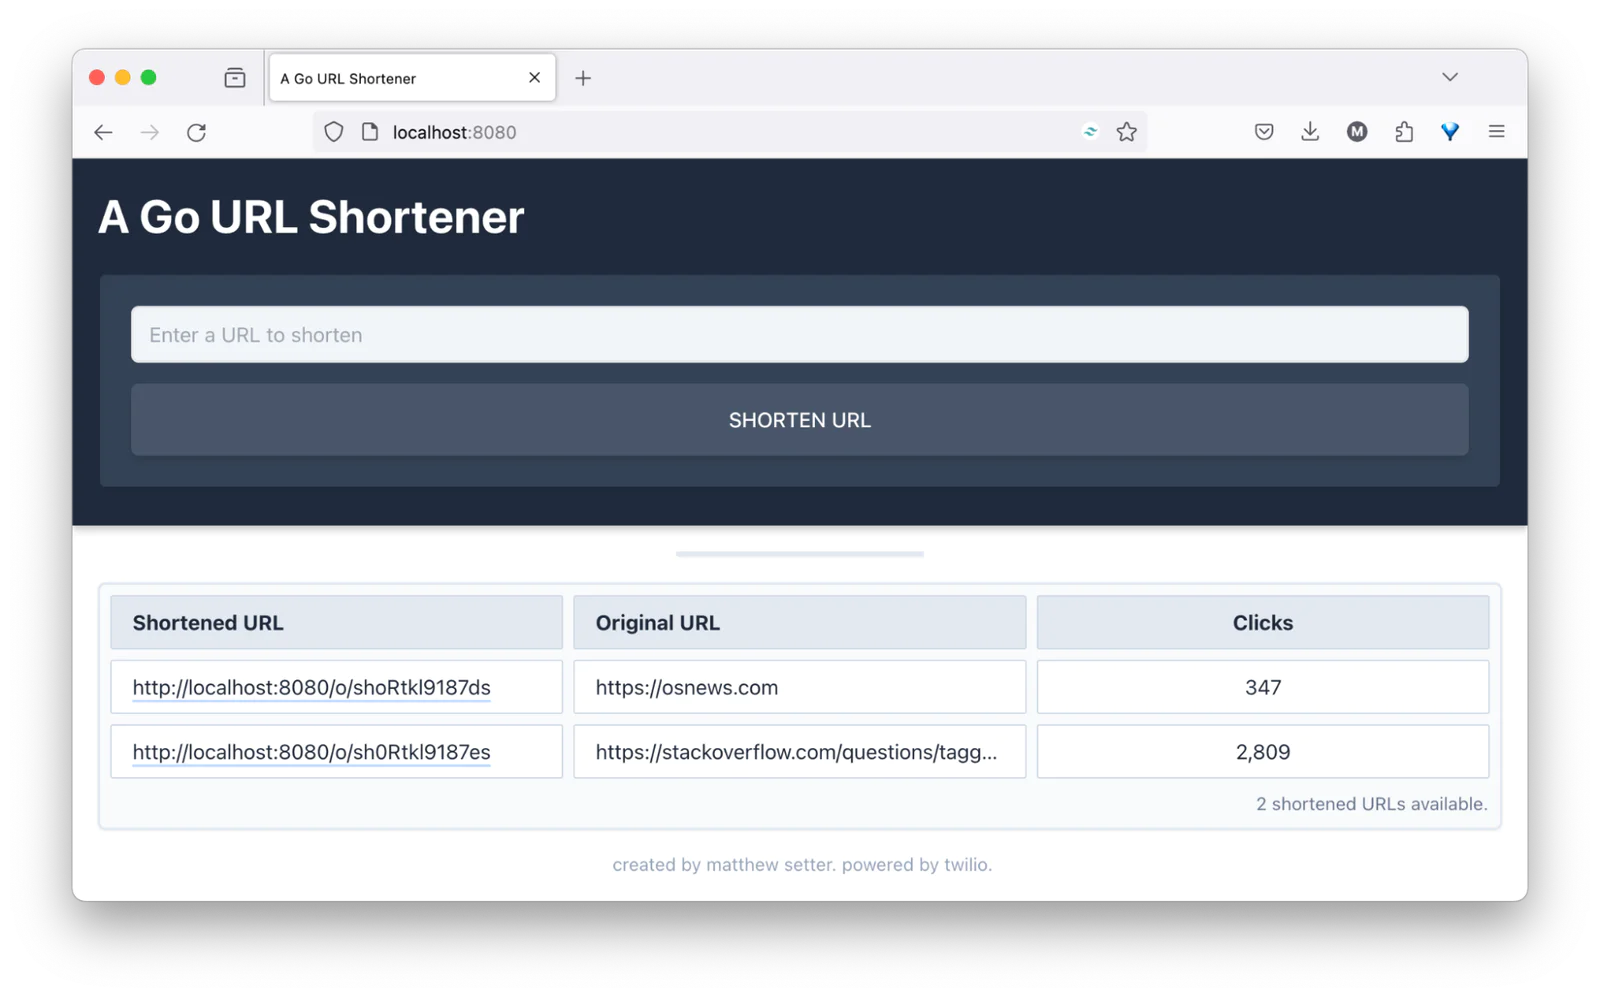 The default page of the URL shortener. The form to shorten URLs is at the top of page and a table of two shortened URLs is underneath